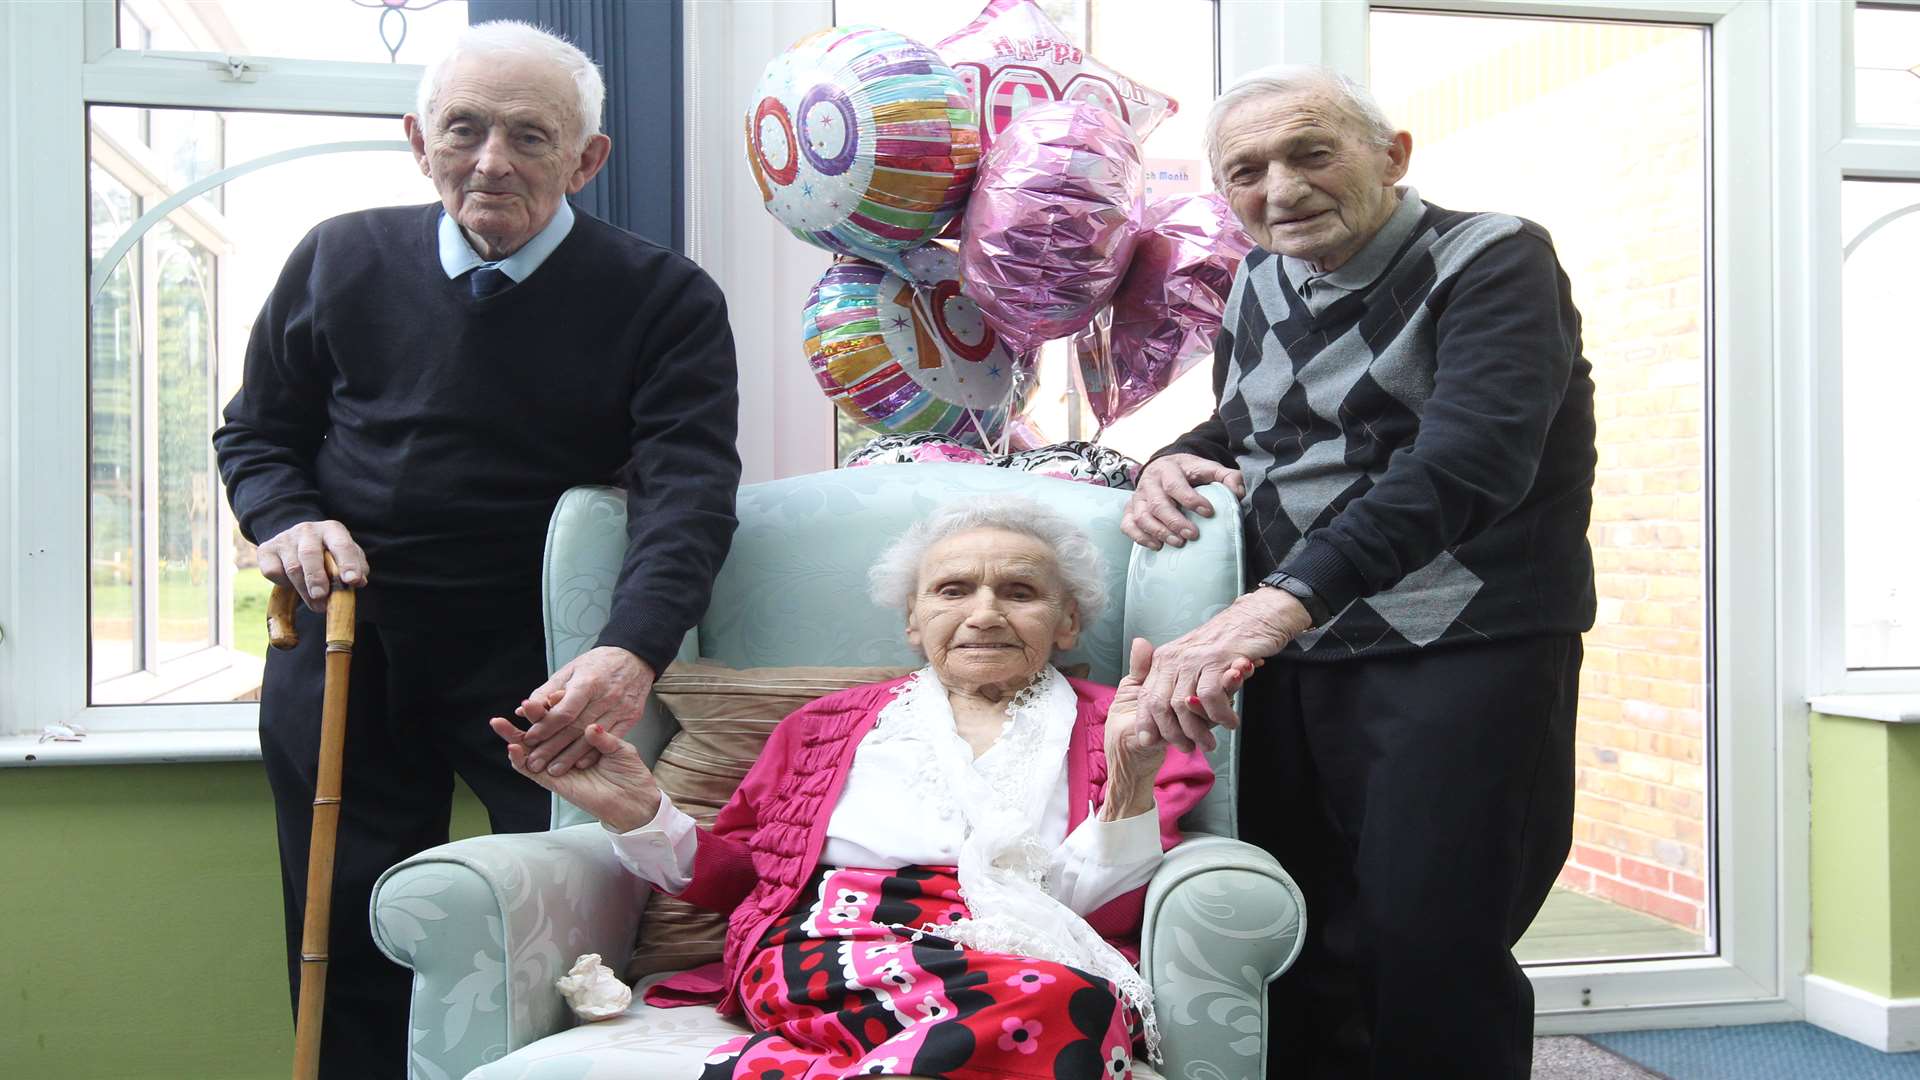 The three centenarians at The Hollies Residential Home in Gravesend. From left: George Huggins, Florence O'Dwyer and Alfred Hickmott